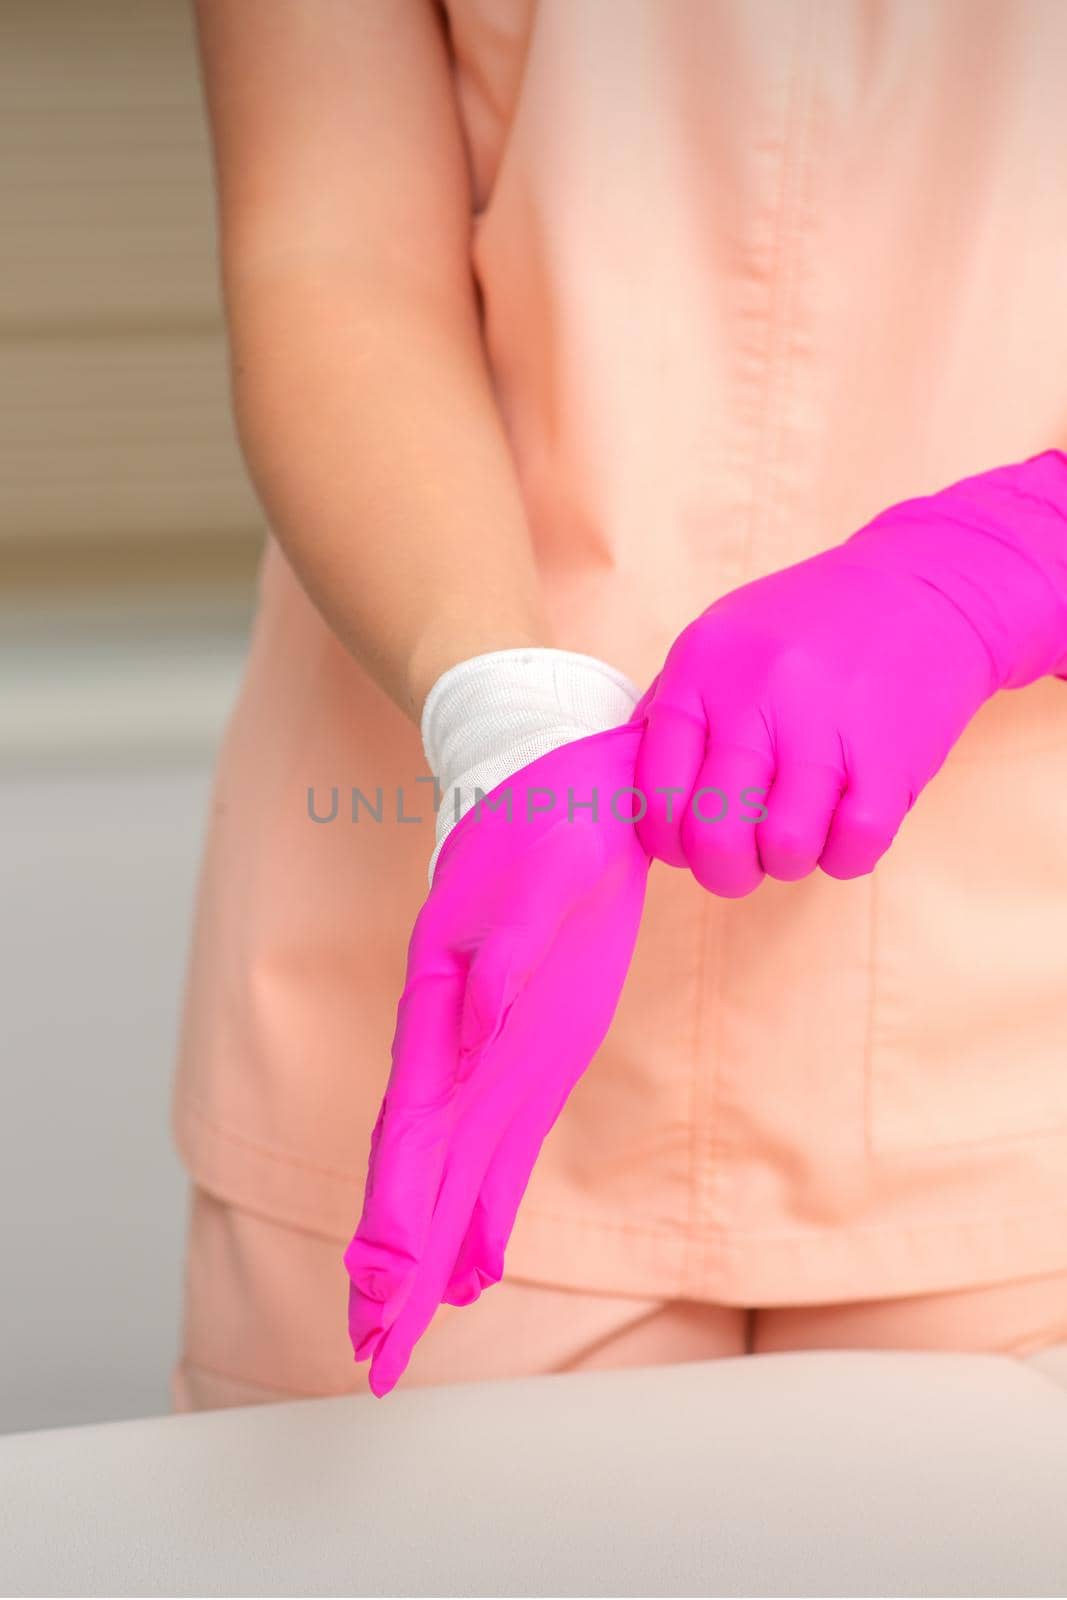 Hand of beautician puts on sterile pink gloves prepares to receive clients indoors